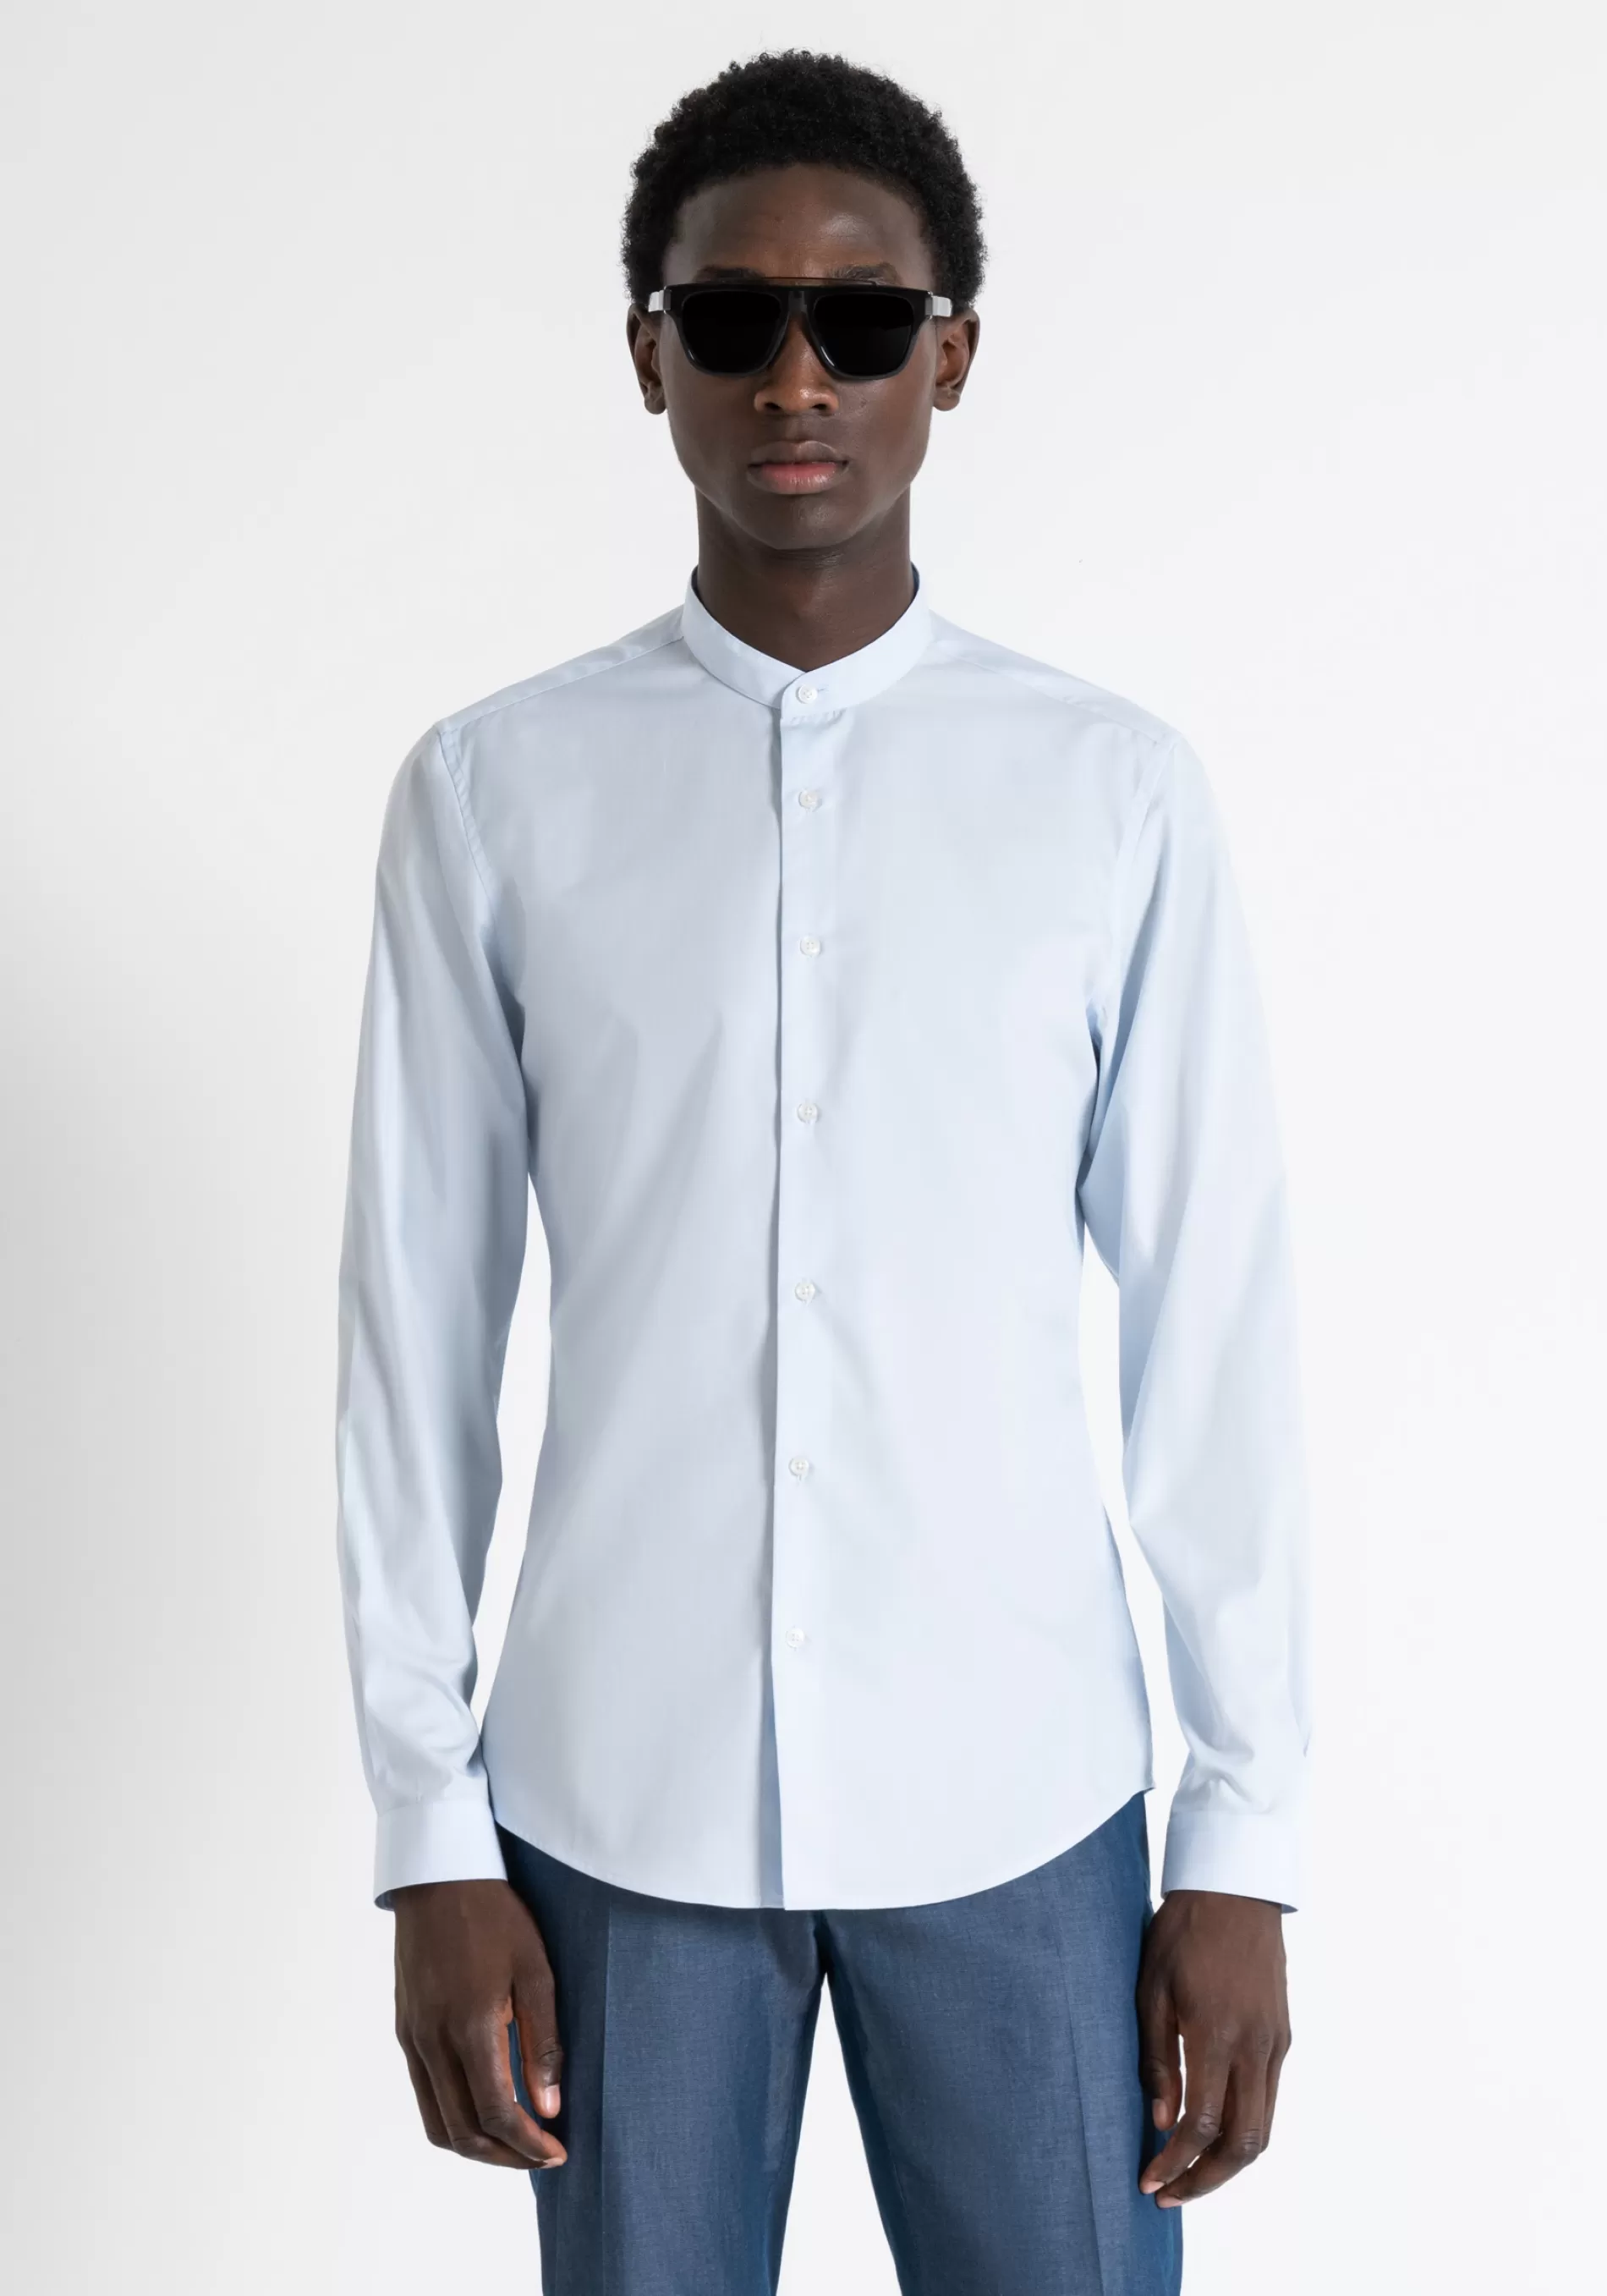 Best Sale "SEOUL" SLIM FIT SHIRT IN EASY IRON COTTON Shirts